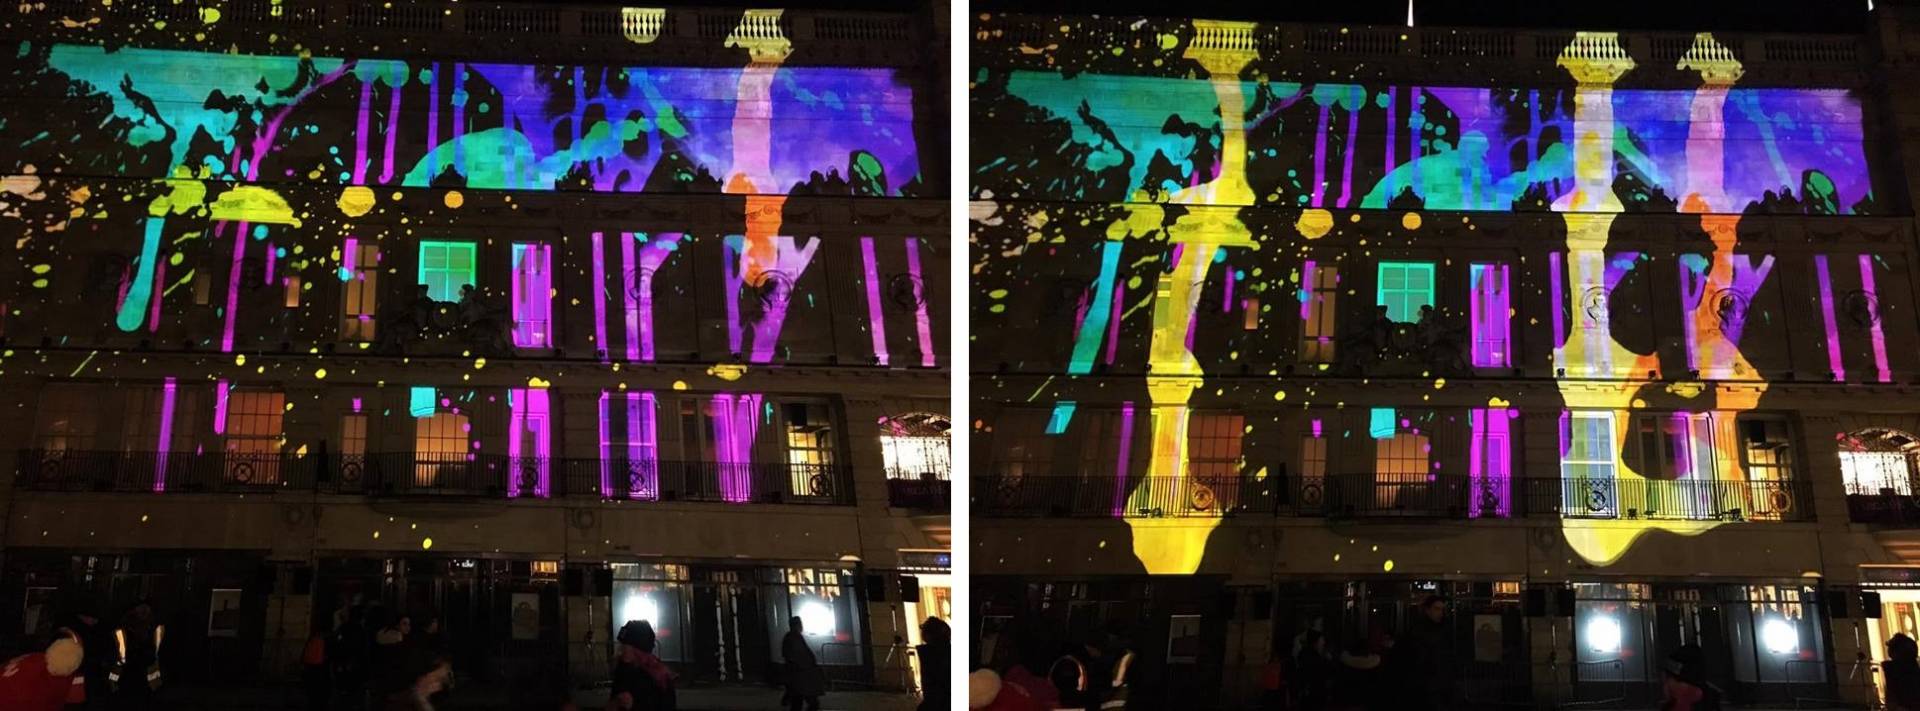 Piccadilly, NOVAK @ Piccadilly, for Lumiere London